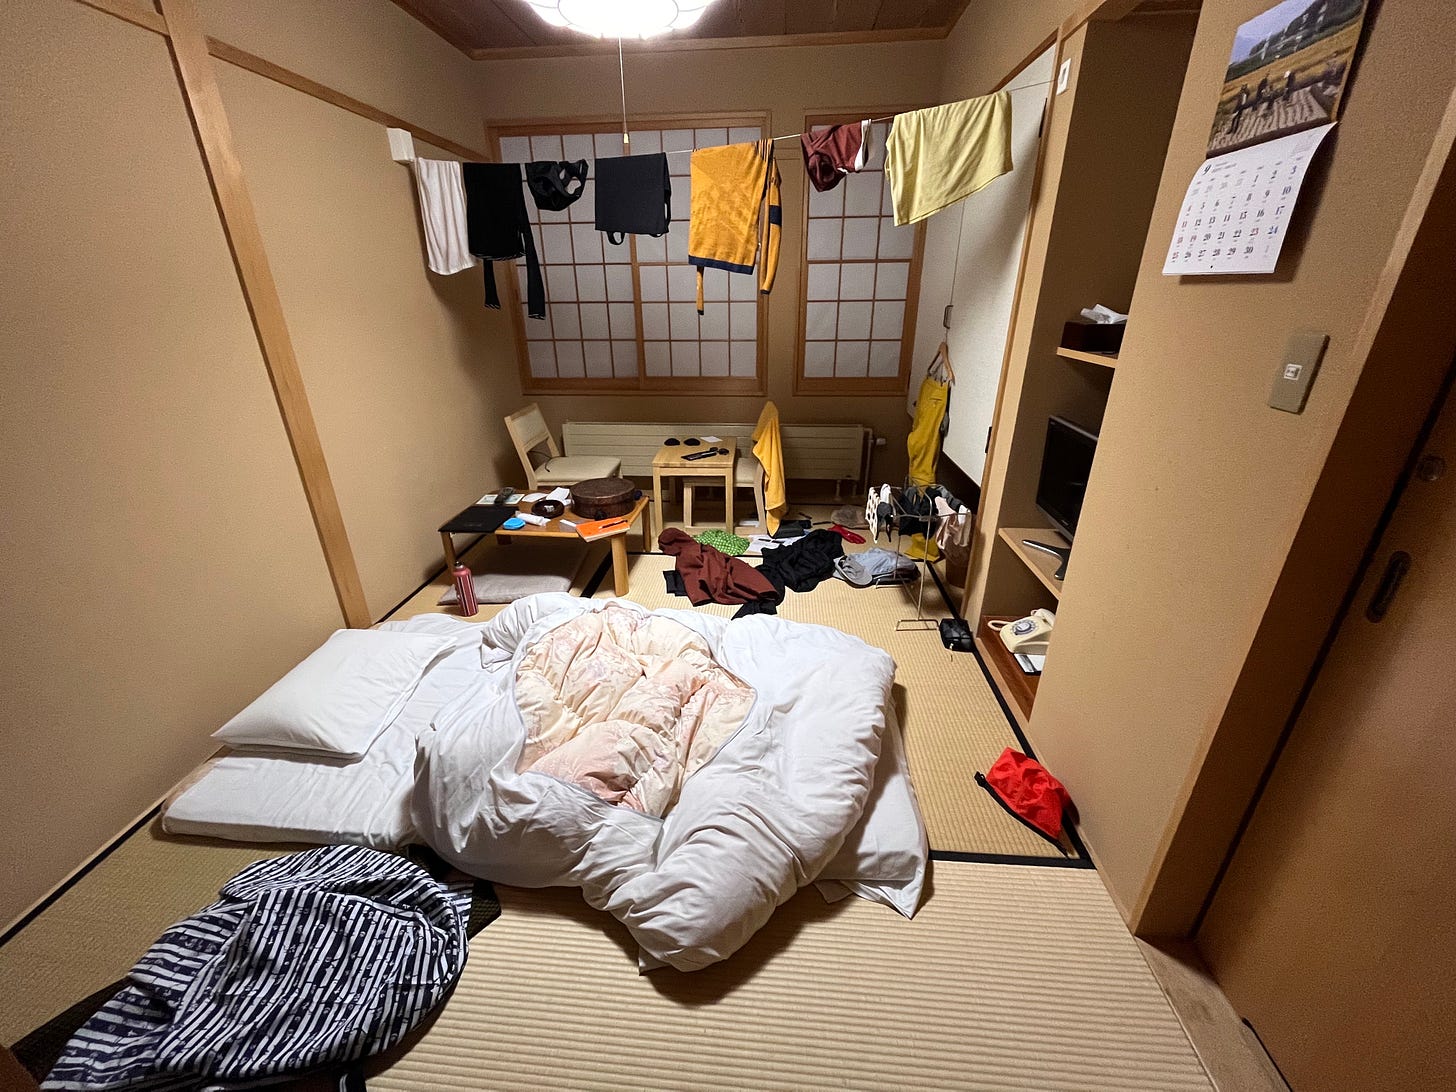 A tatami room with clothes hanging up to dry and objects scattered around the room.